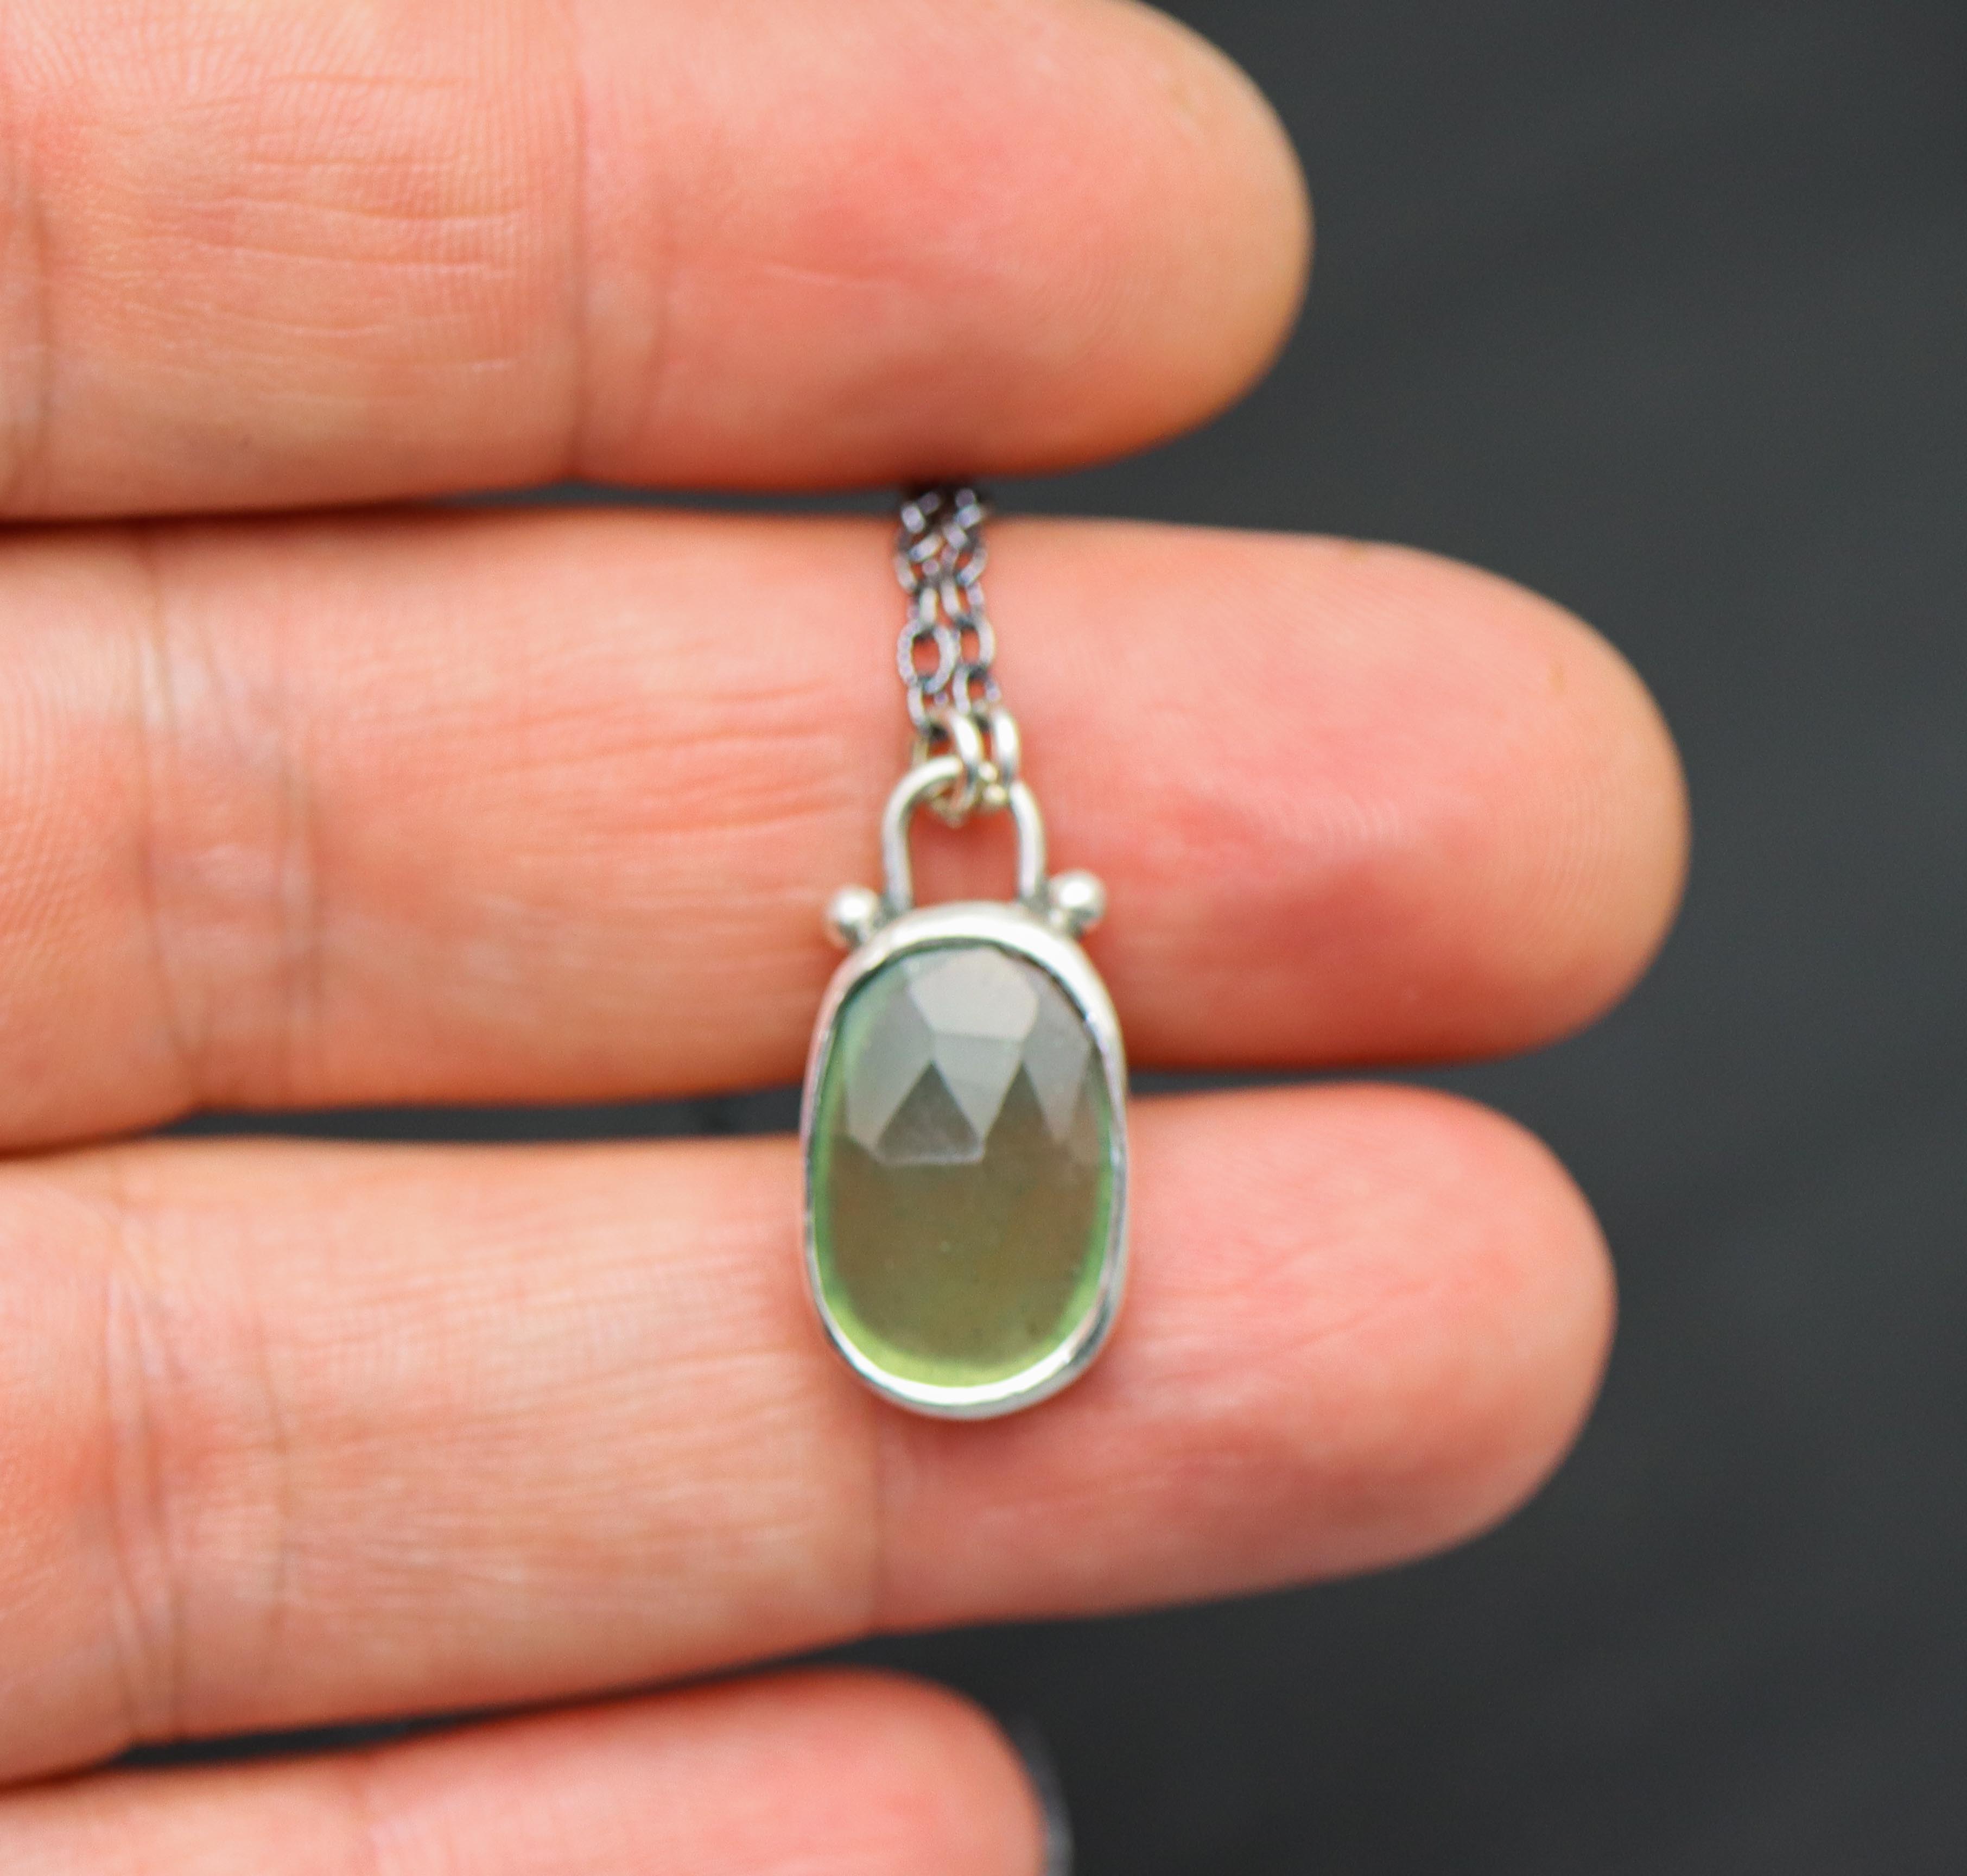 Green Serpentine Pendant Necklace Sterling Silver